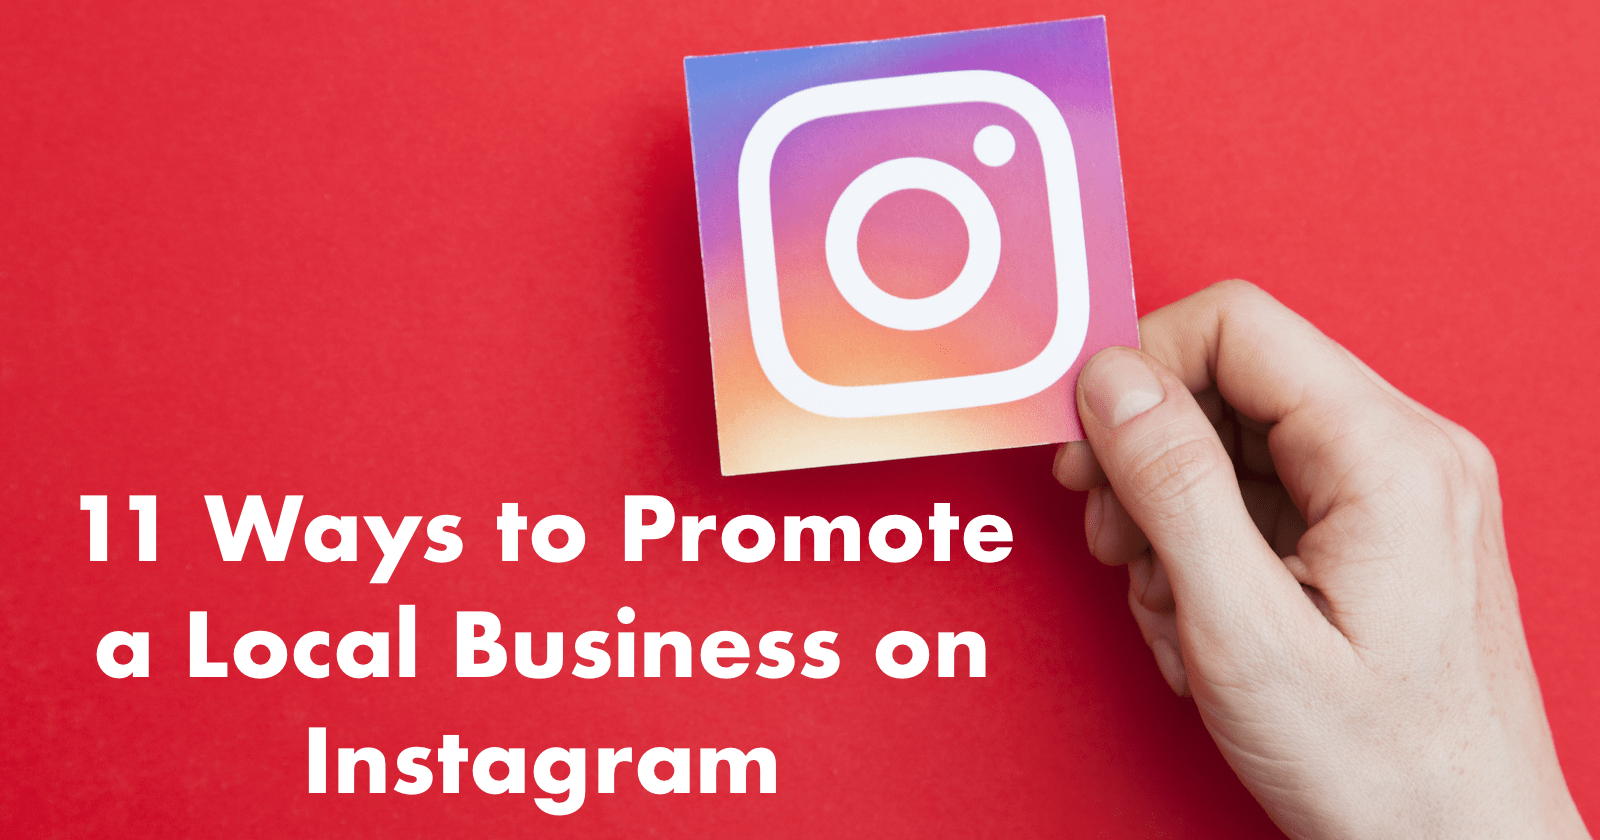 11 Ways to Promote a Local Business on Instagram